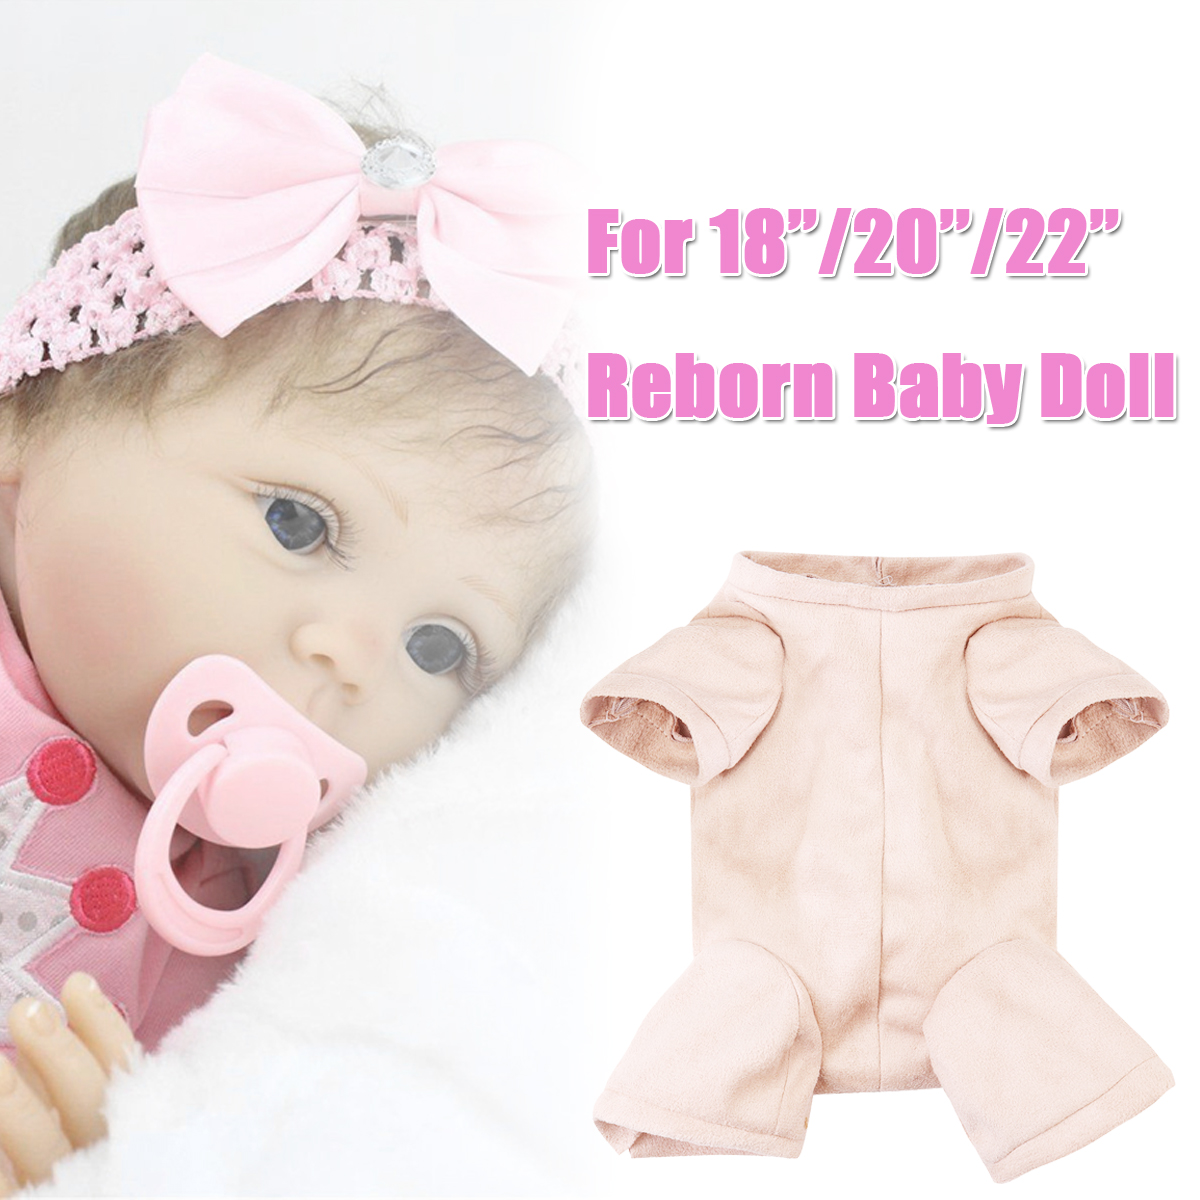 18-20-22-Reborn-Doll-Cloth-Body-Girl-Boy-Kits-Accessories-Replacement-1421125-4